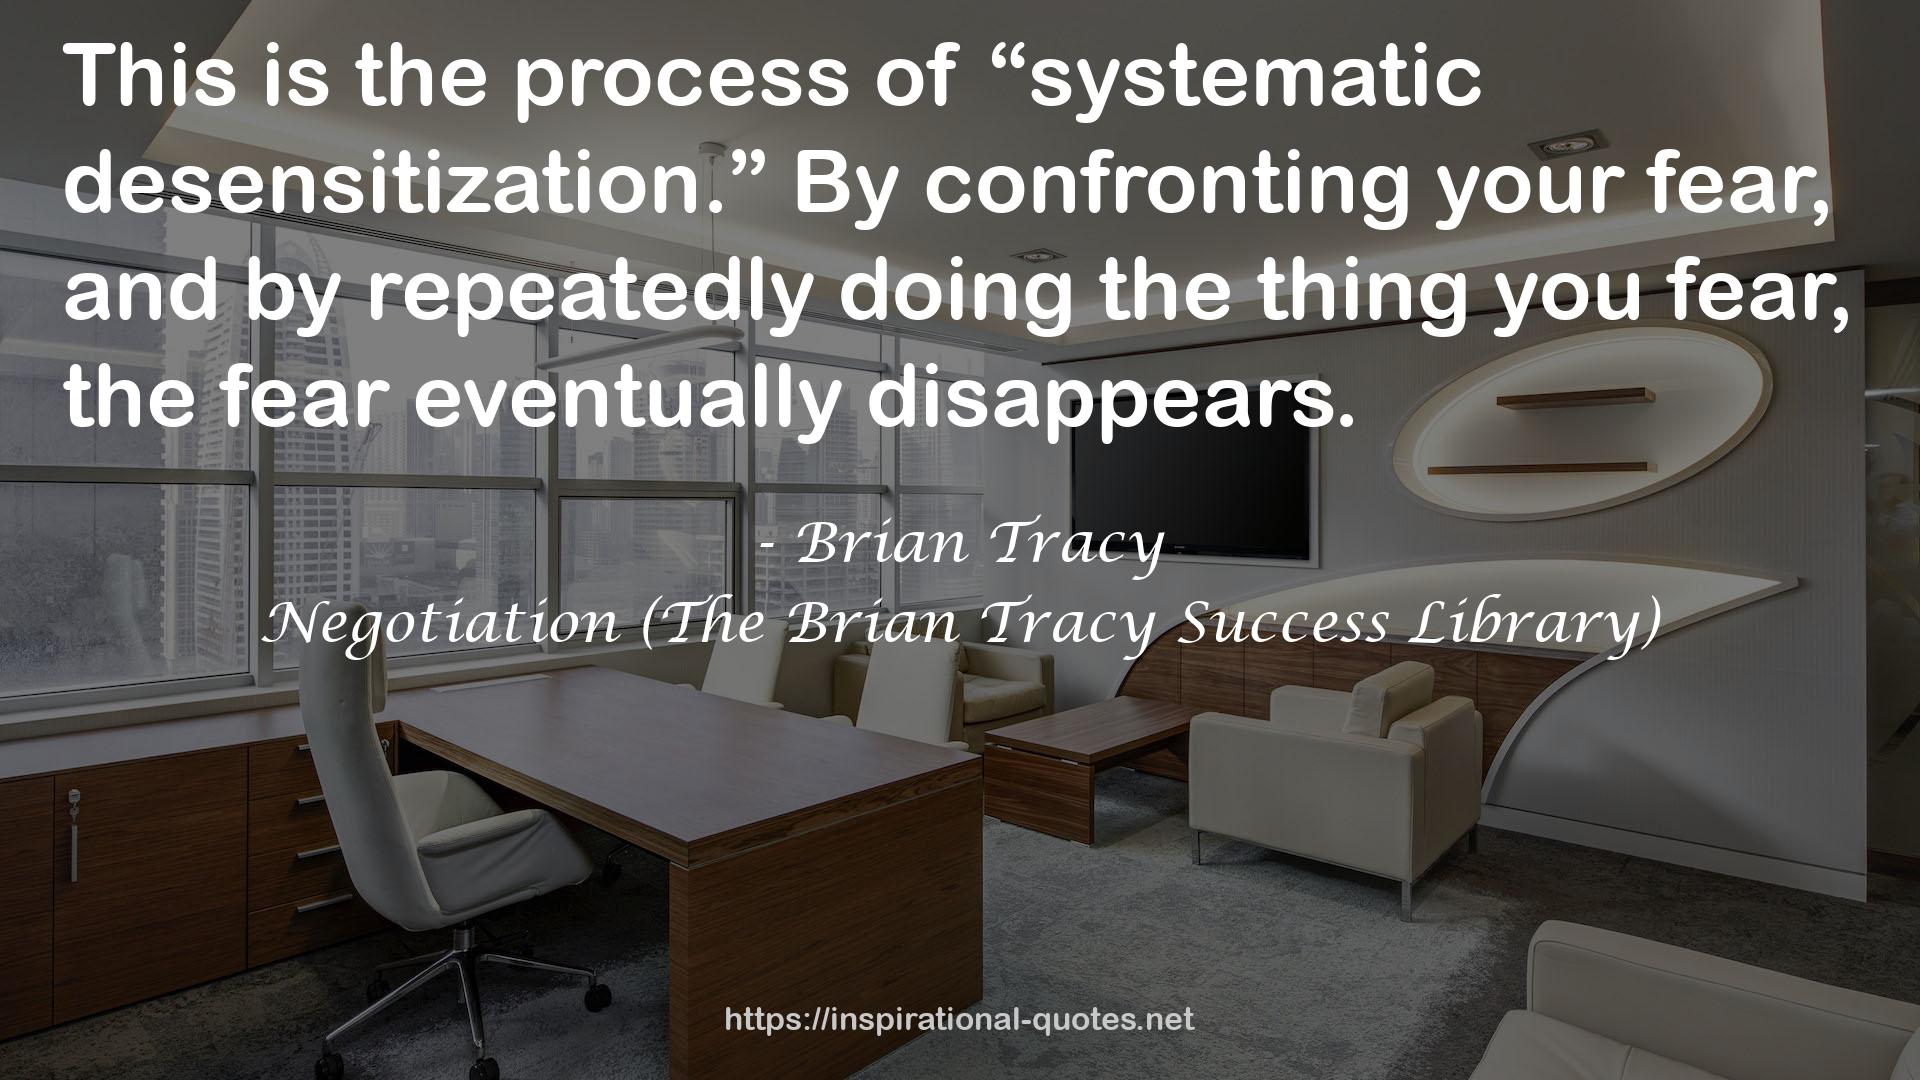 Negotiation (The Brian Tracy Success Library) QUOTES